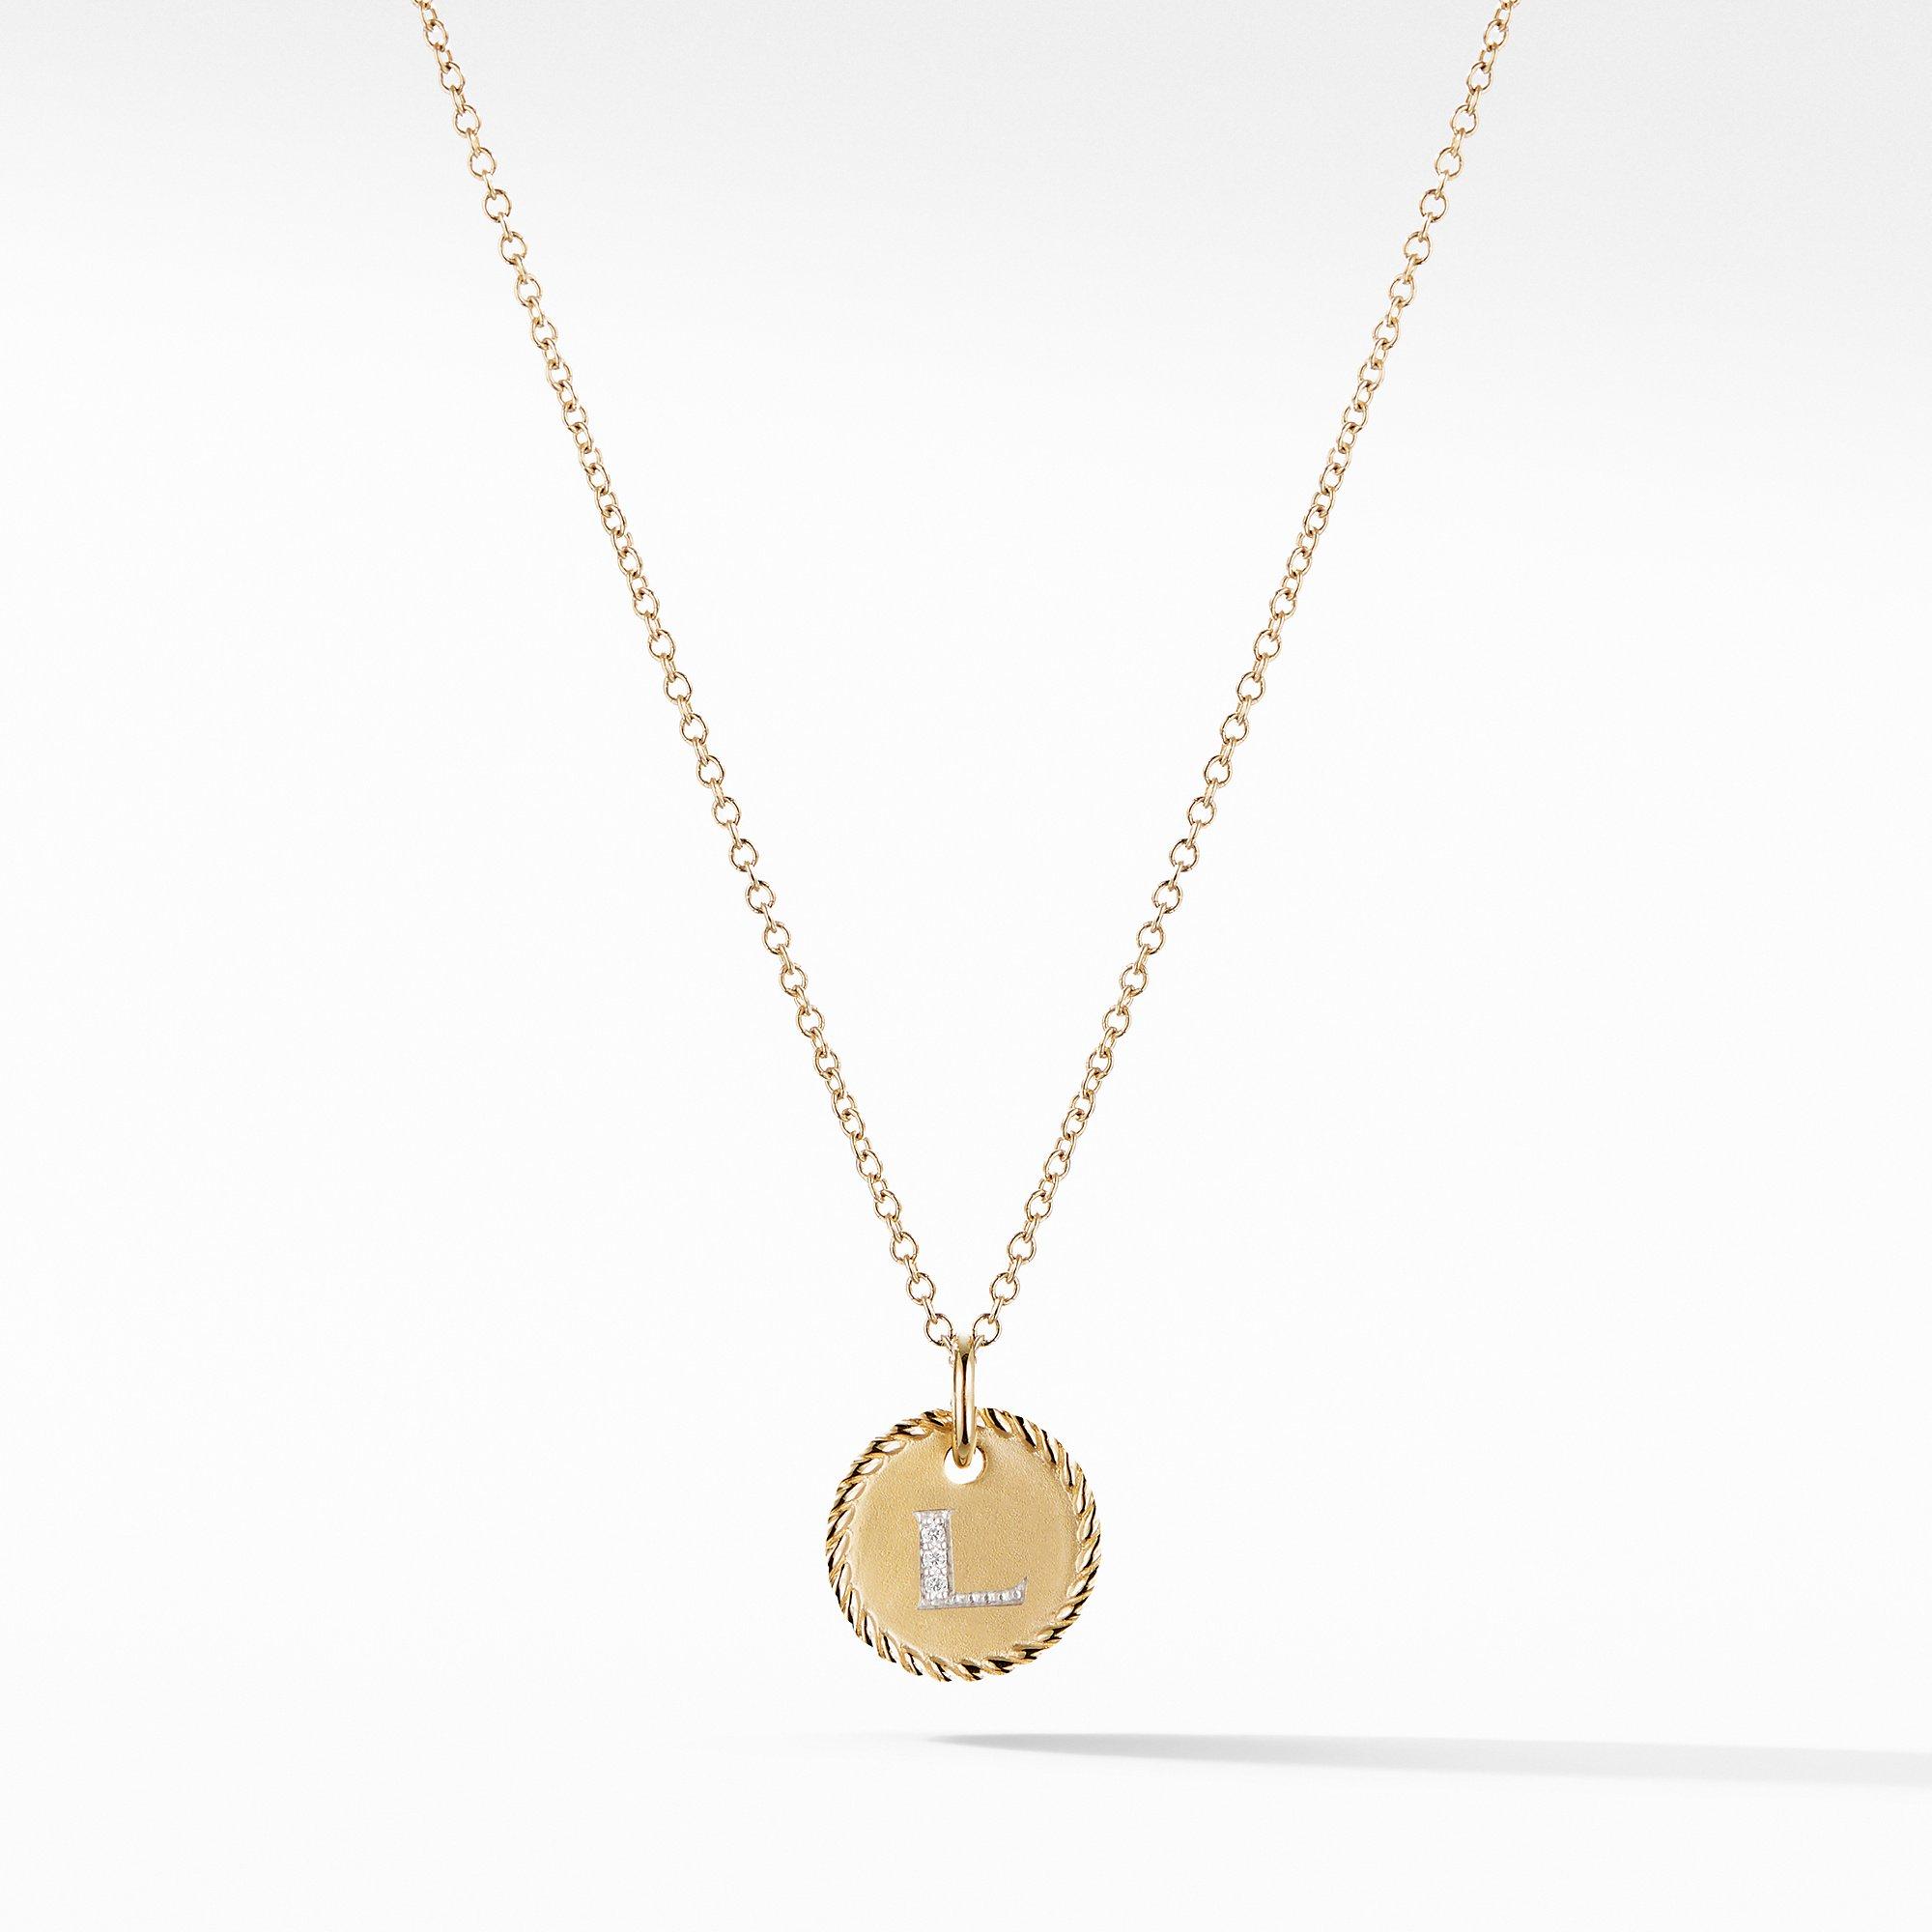 David Yurman L Initial Charm Necklace in 18k Yellow Gold with Diamonds